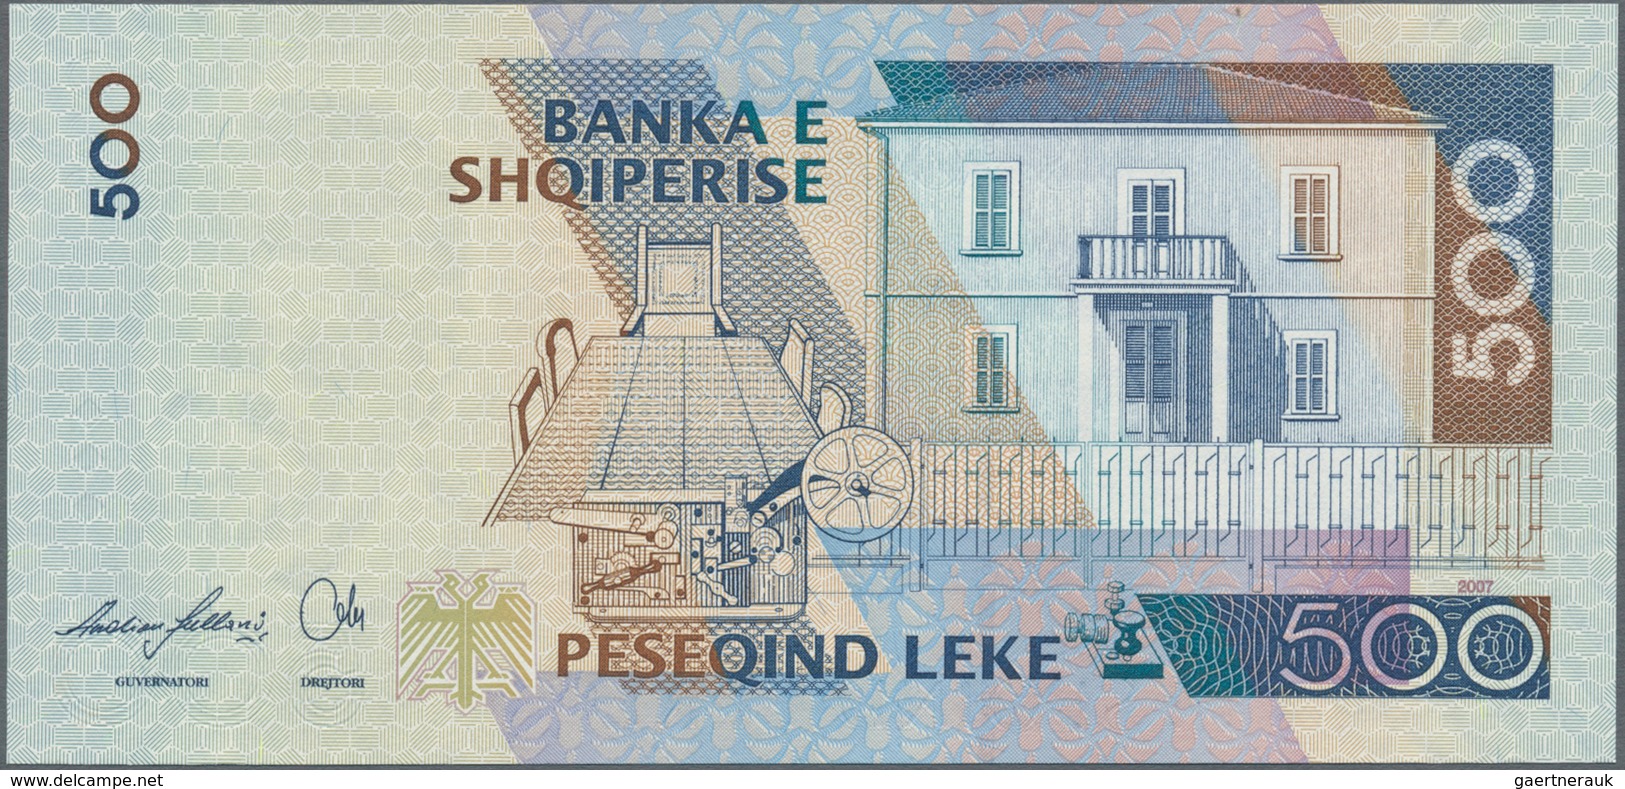 Albania / Albanien: Set with 5 banknotes of the 2007 issue with 200, 500, 1000, 2000 and 5000 Leke,